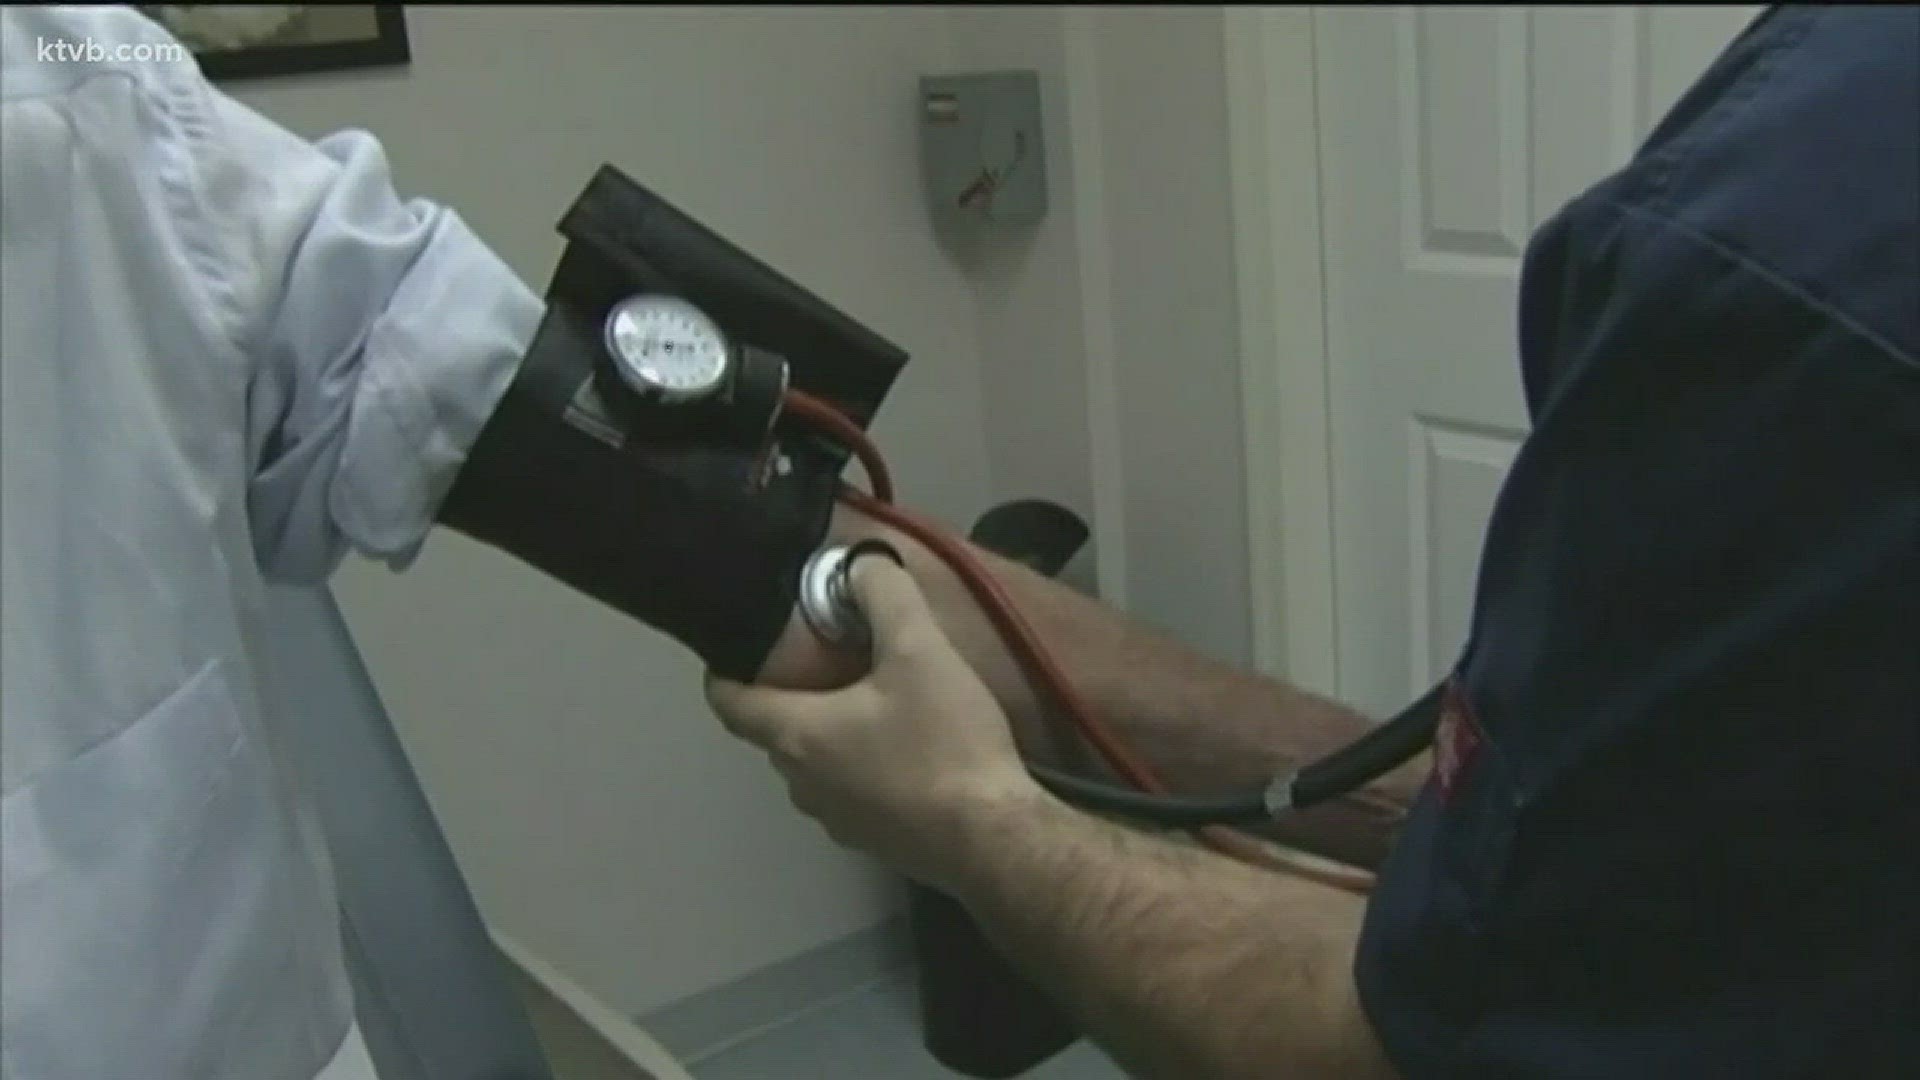 This week's segment looks at healthcare for state employees.